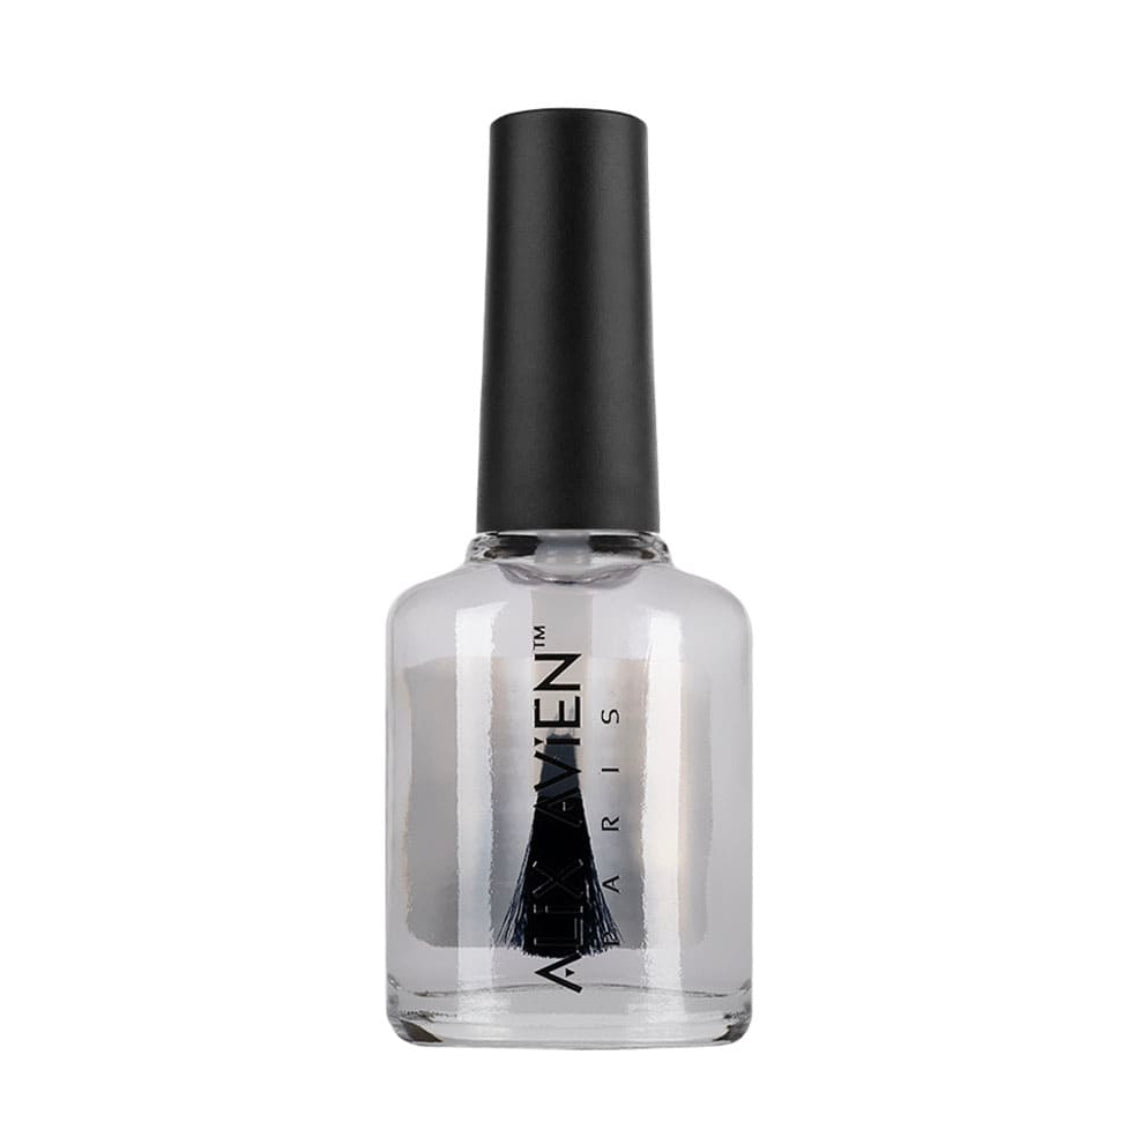 Buy Colorbar Nail Lacquer, Powder Grey, 12 ml Online at Lowest Price Ever  in India | Check Reviews & Ratings - Shop The World